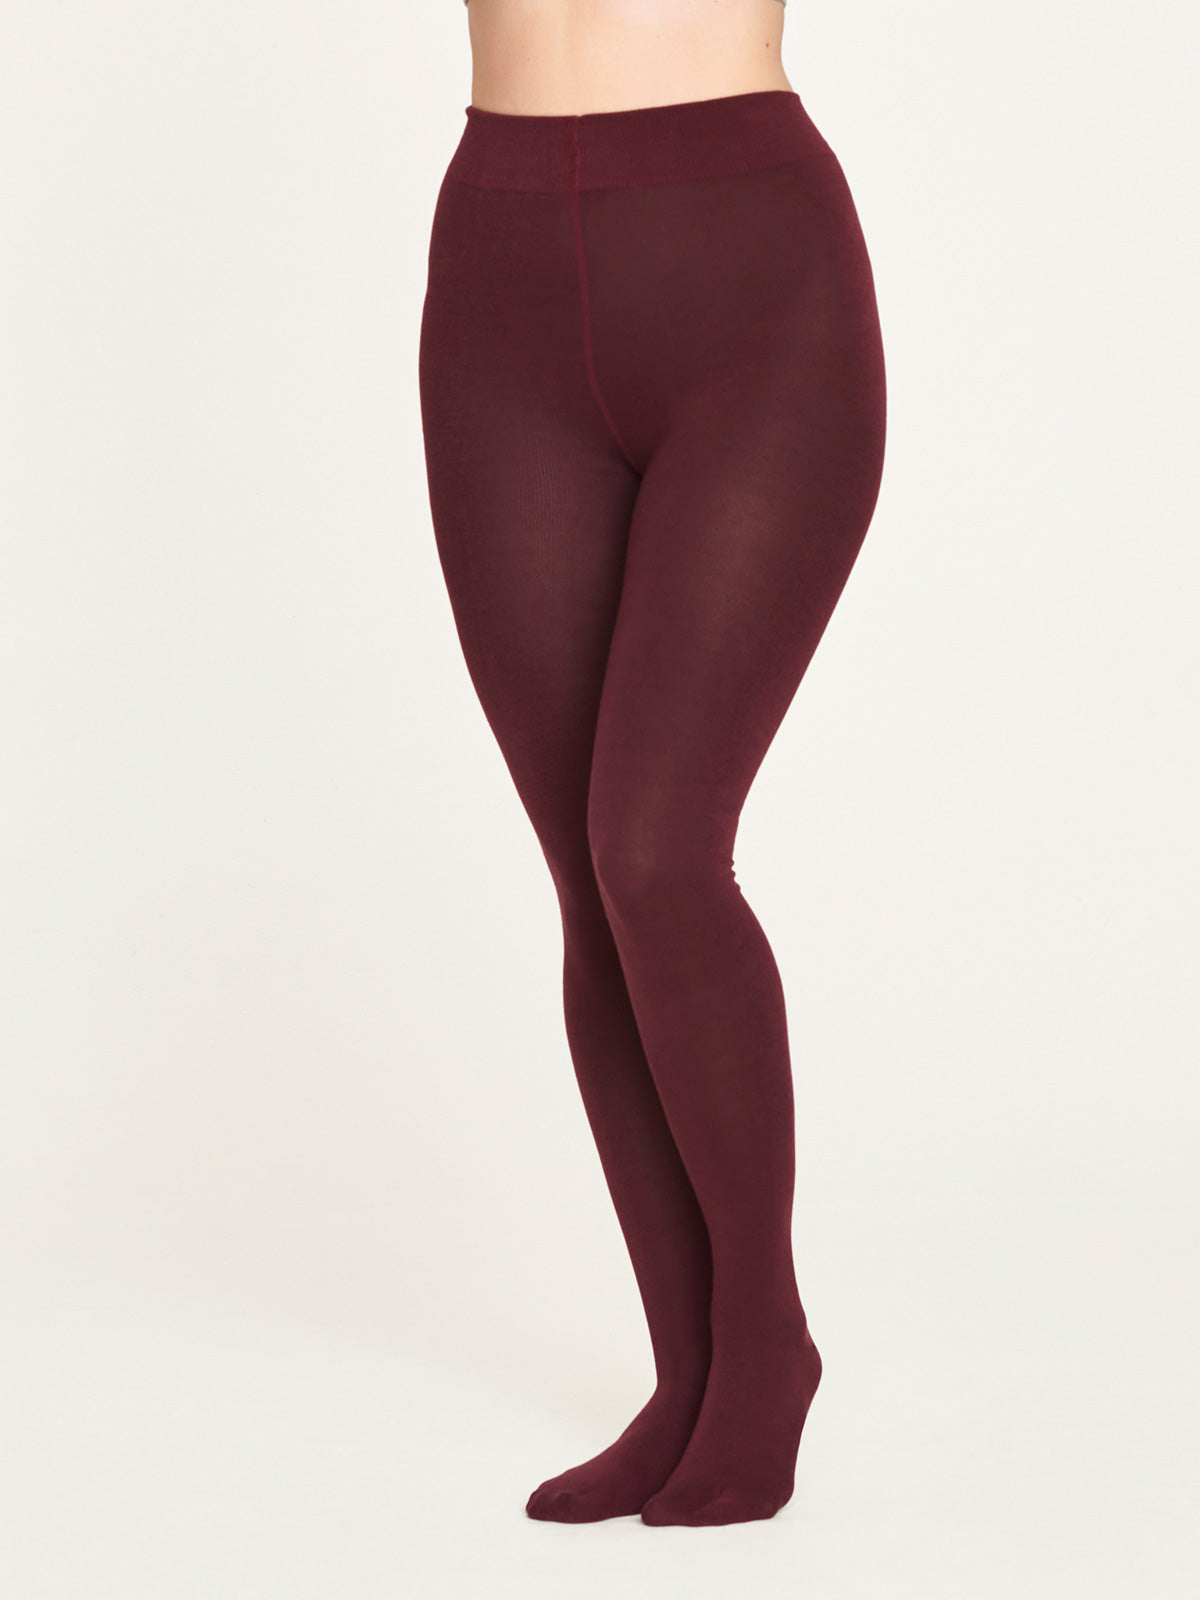 Bamboo Essential Plain Tights in Burgundy